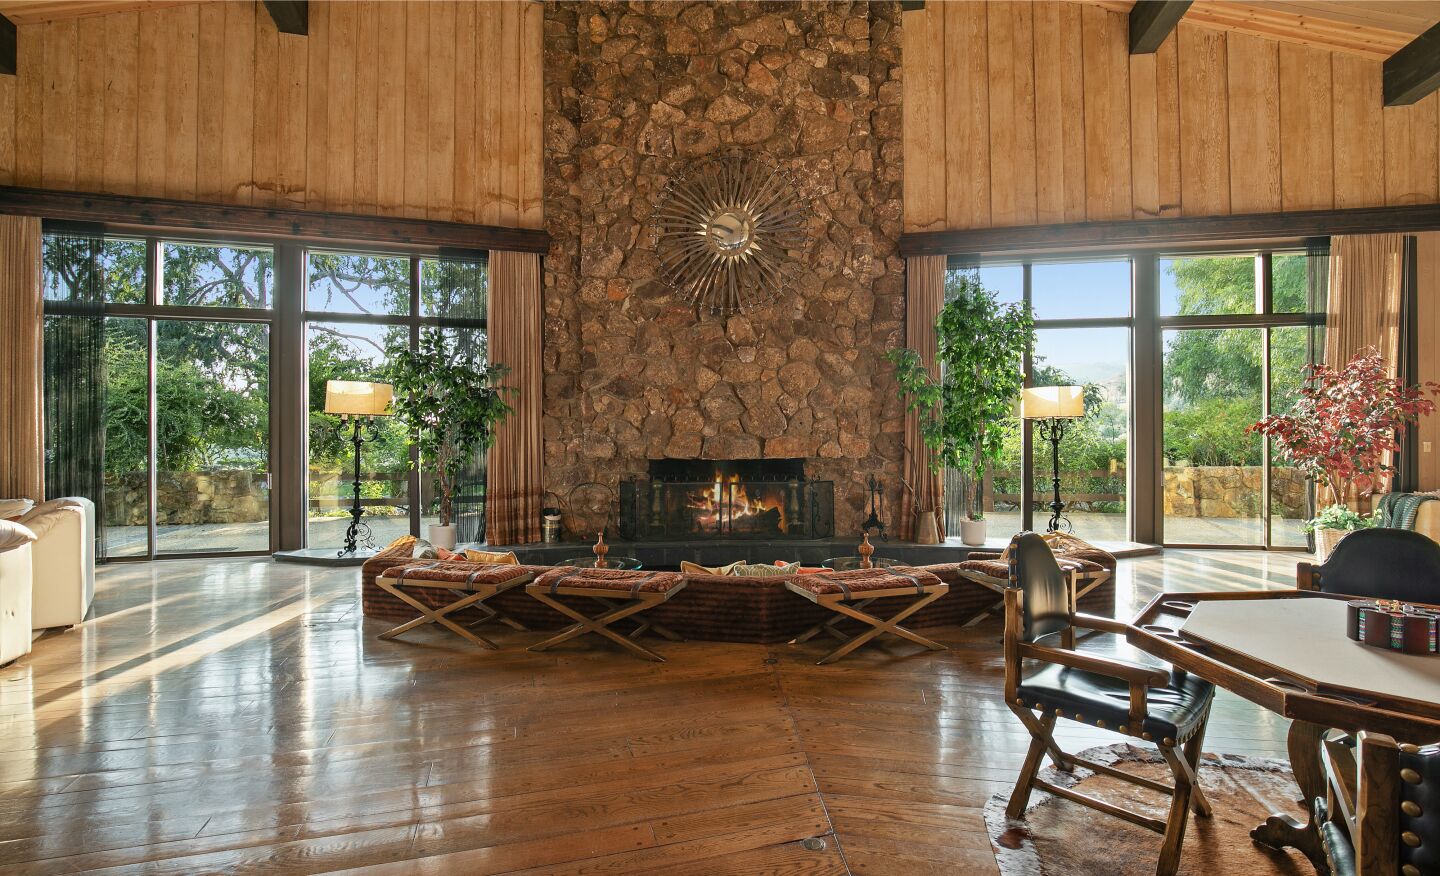 The stone fireplace.